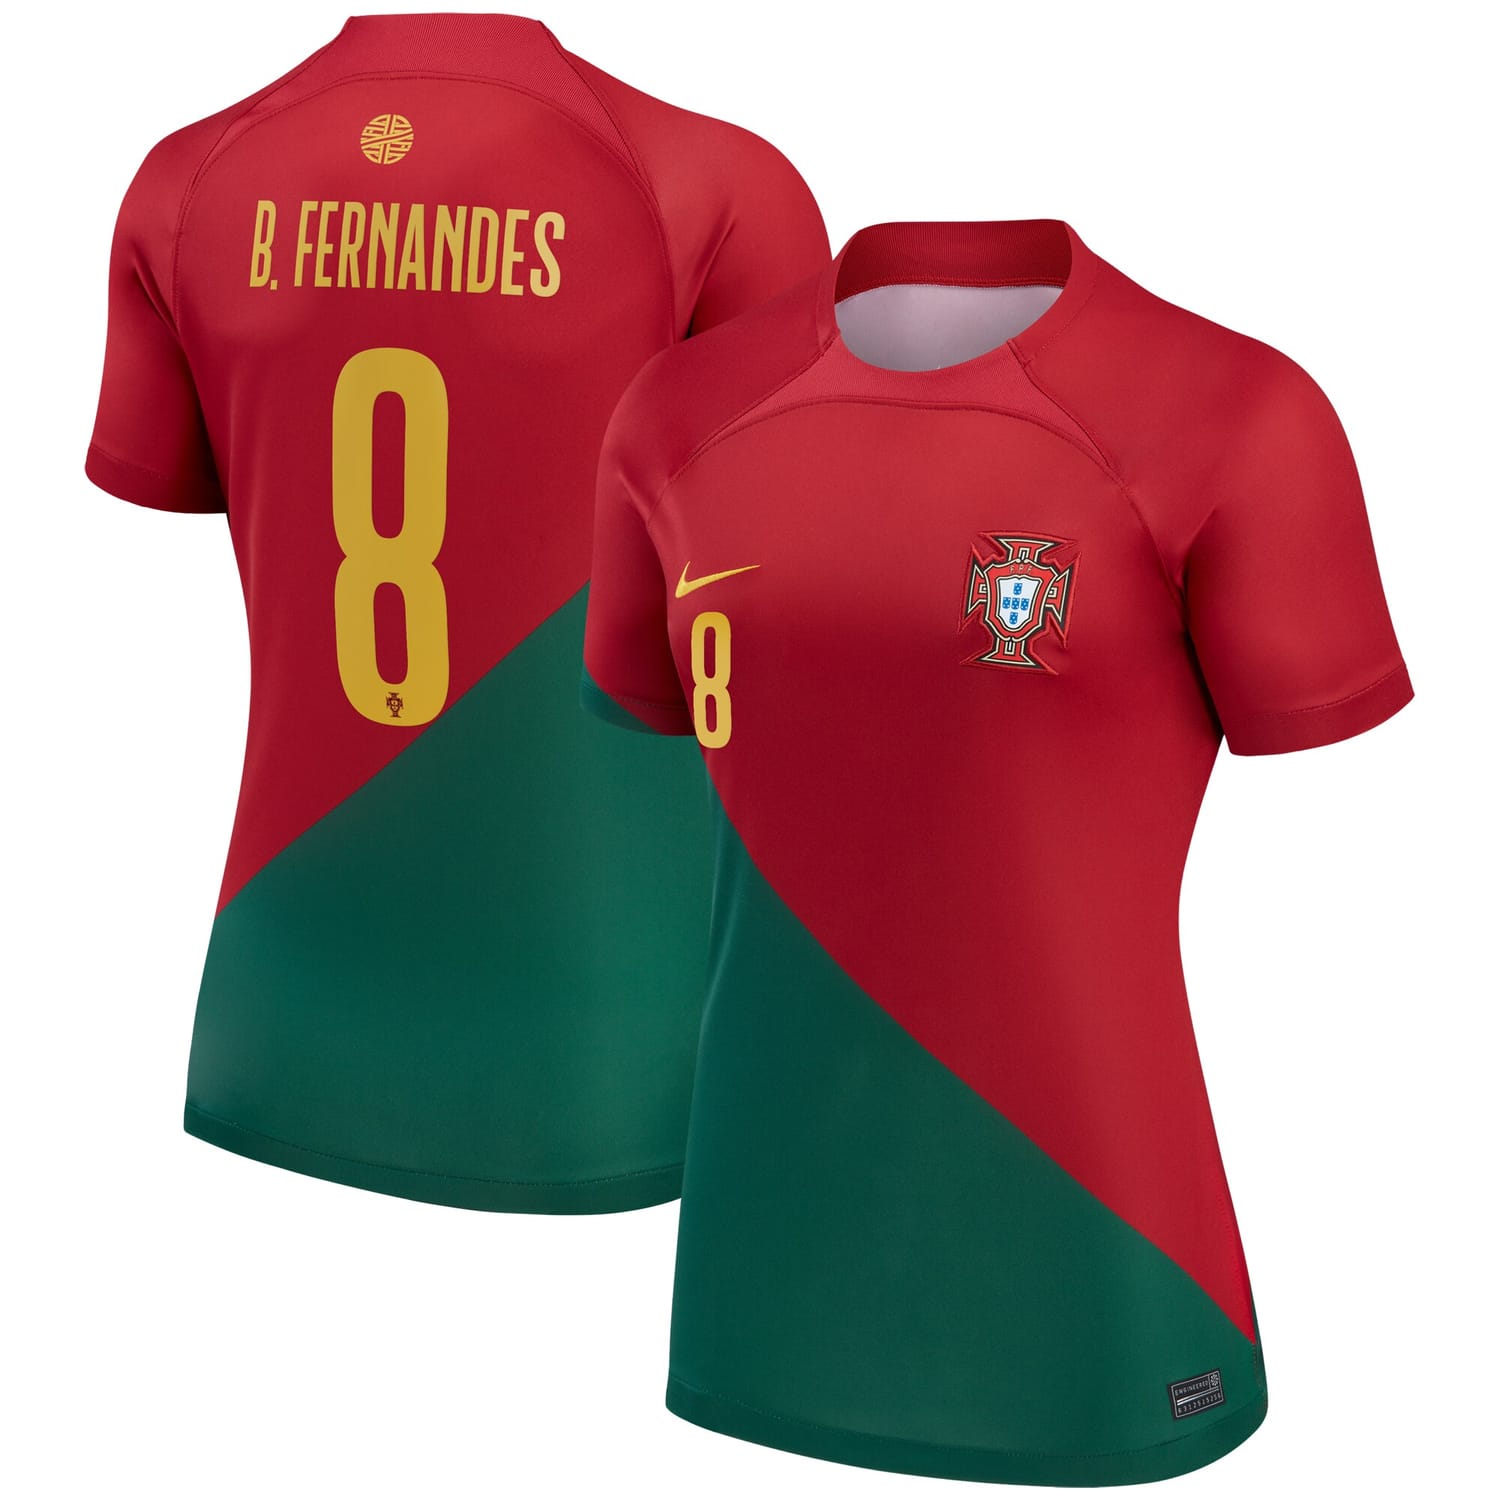 Portugal National Team Home Jersey Shirt Red 2022-23 player Bruno Fernandes printing for Women